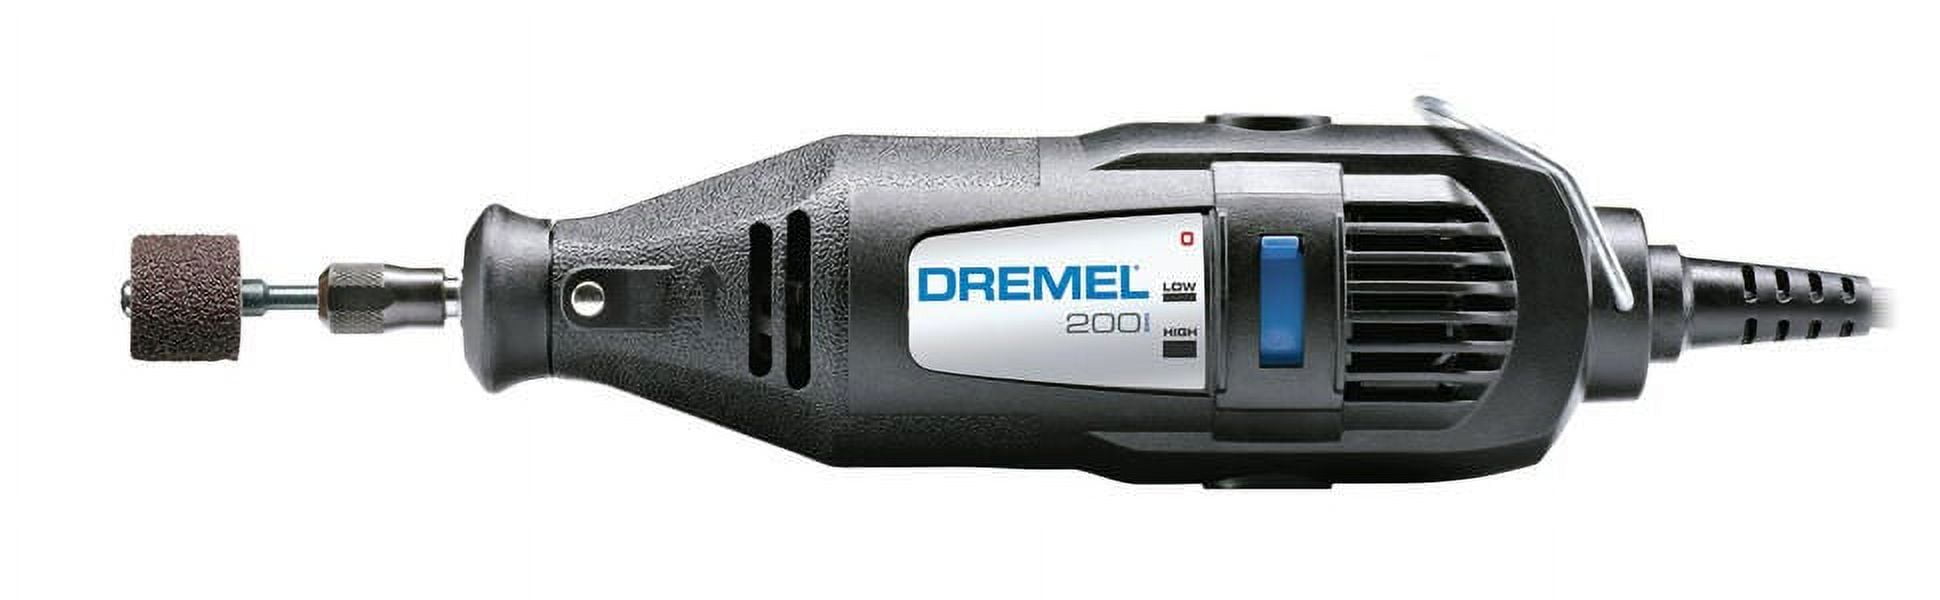 Open Box Dremel 3000-1/26 Variable Speed Rotary Tool Kit 26 Accessories and  Case - Grey 